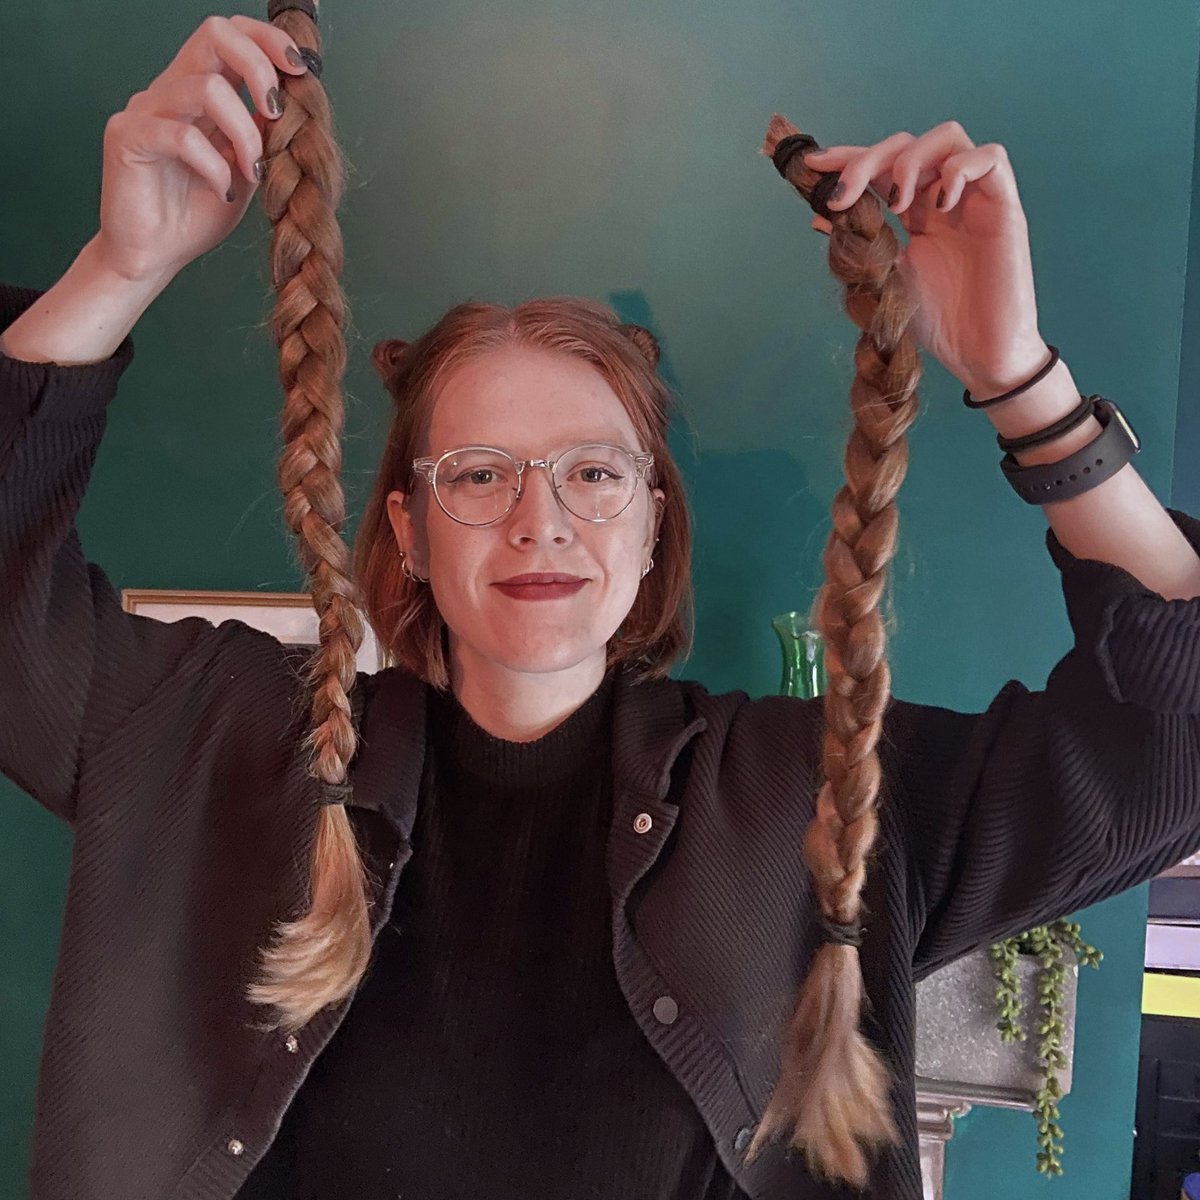 Cut my hair off the other week for @LPTrustUK!

If you’re interested in doing the same, find out how at littleprincesses.org.uk/donate-hair 💇‍♀️ 

Also, shout out to Nina at Hair Envy in #Wigan for being a top hairdresser! Find her on insta @hairbynin4 

#letitgrow #littleprincesstrust